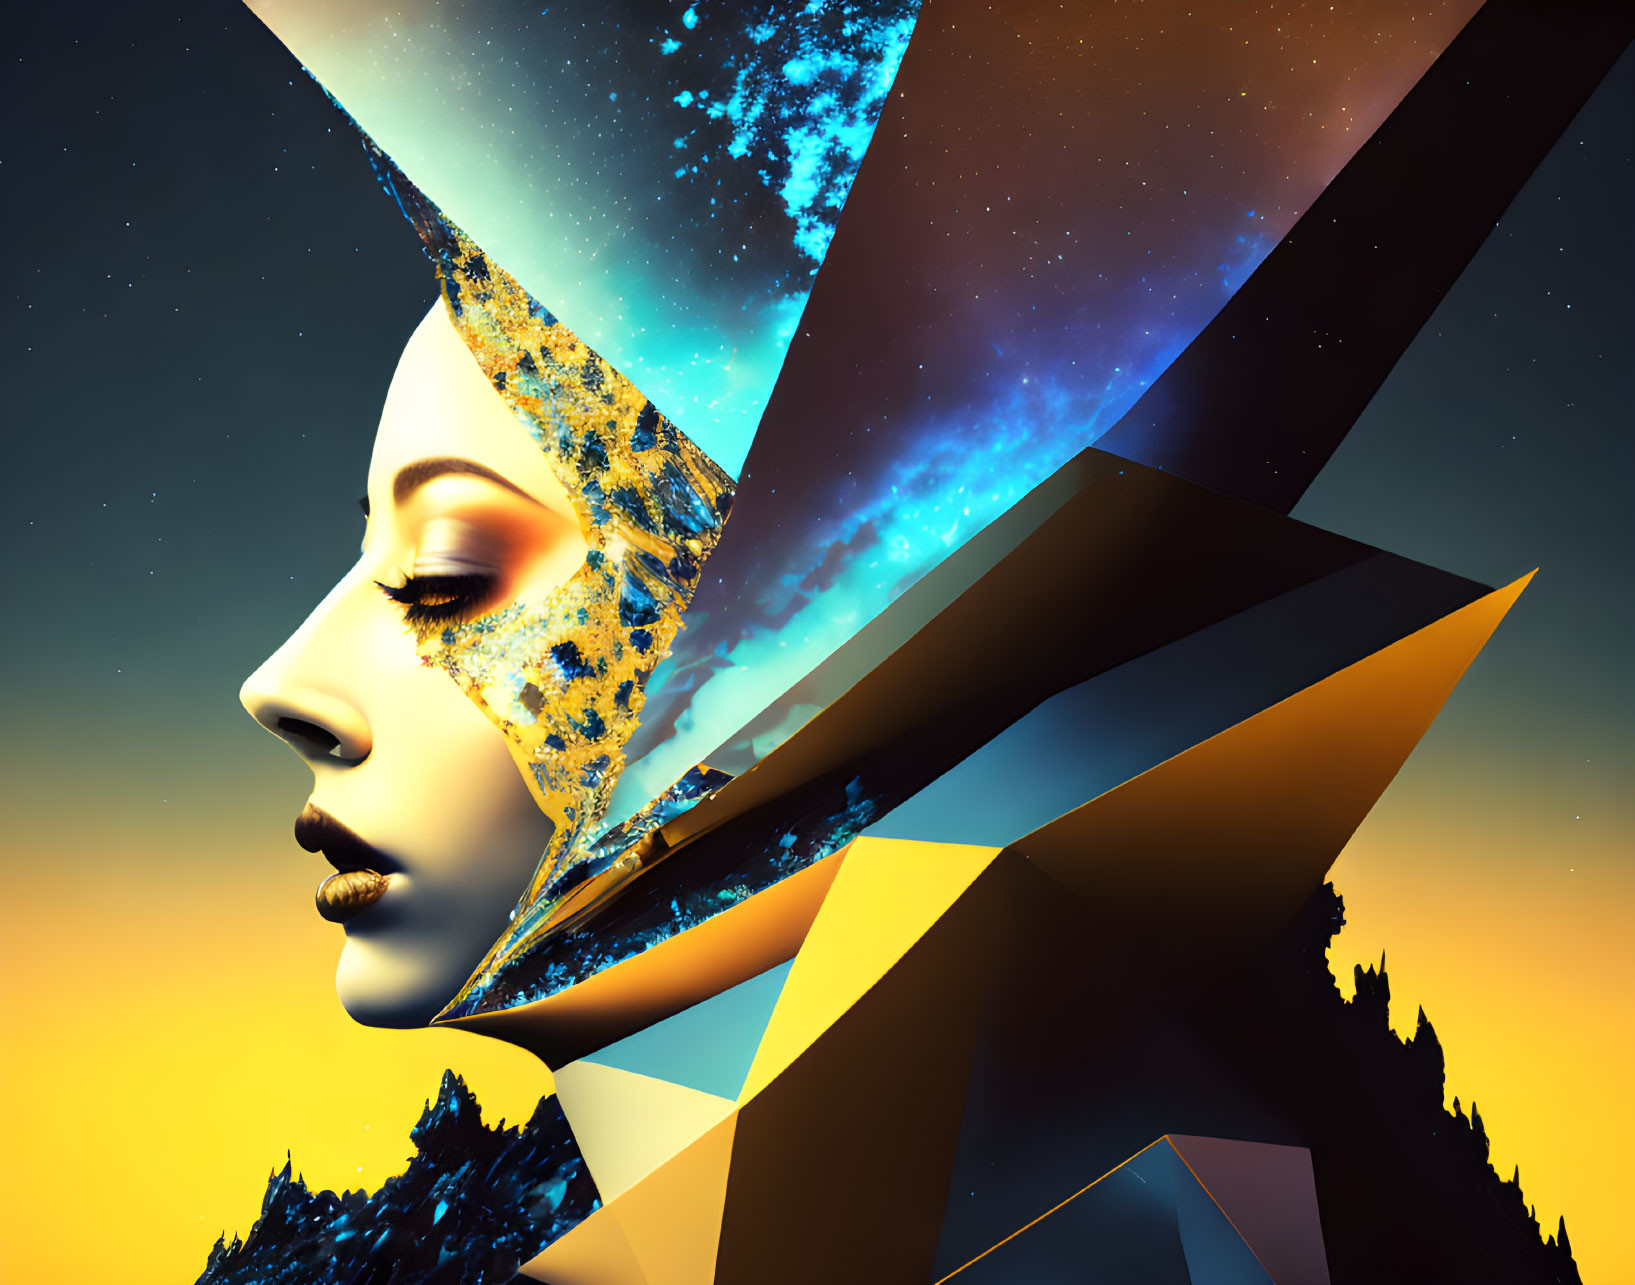 Surreal digital art: Woman's profile with cosmic and geometric elements